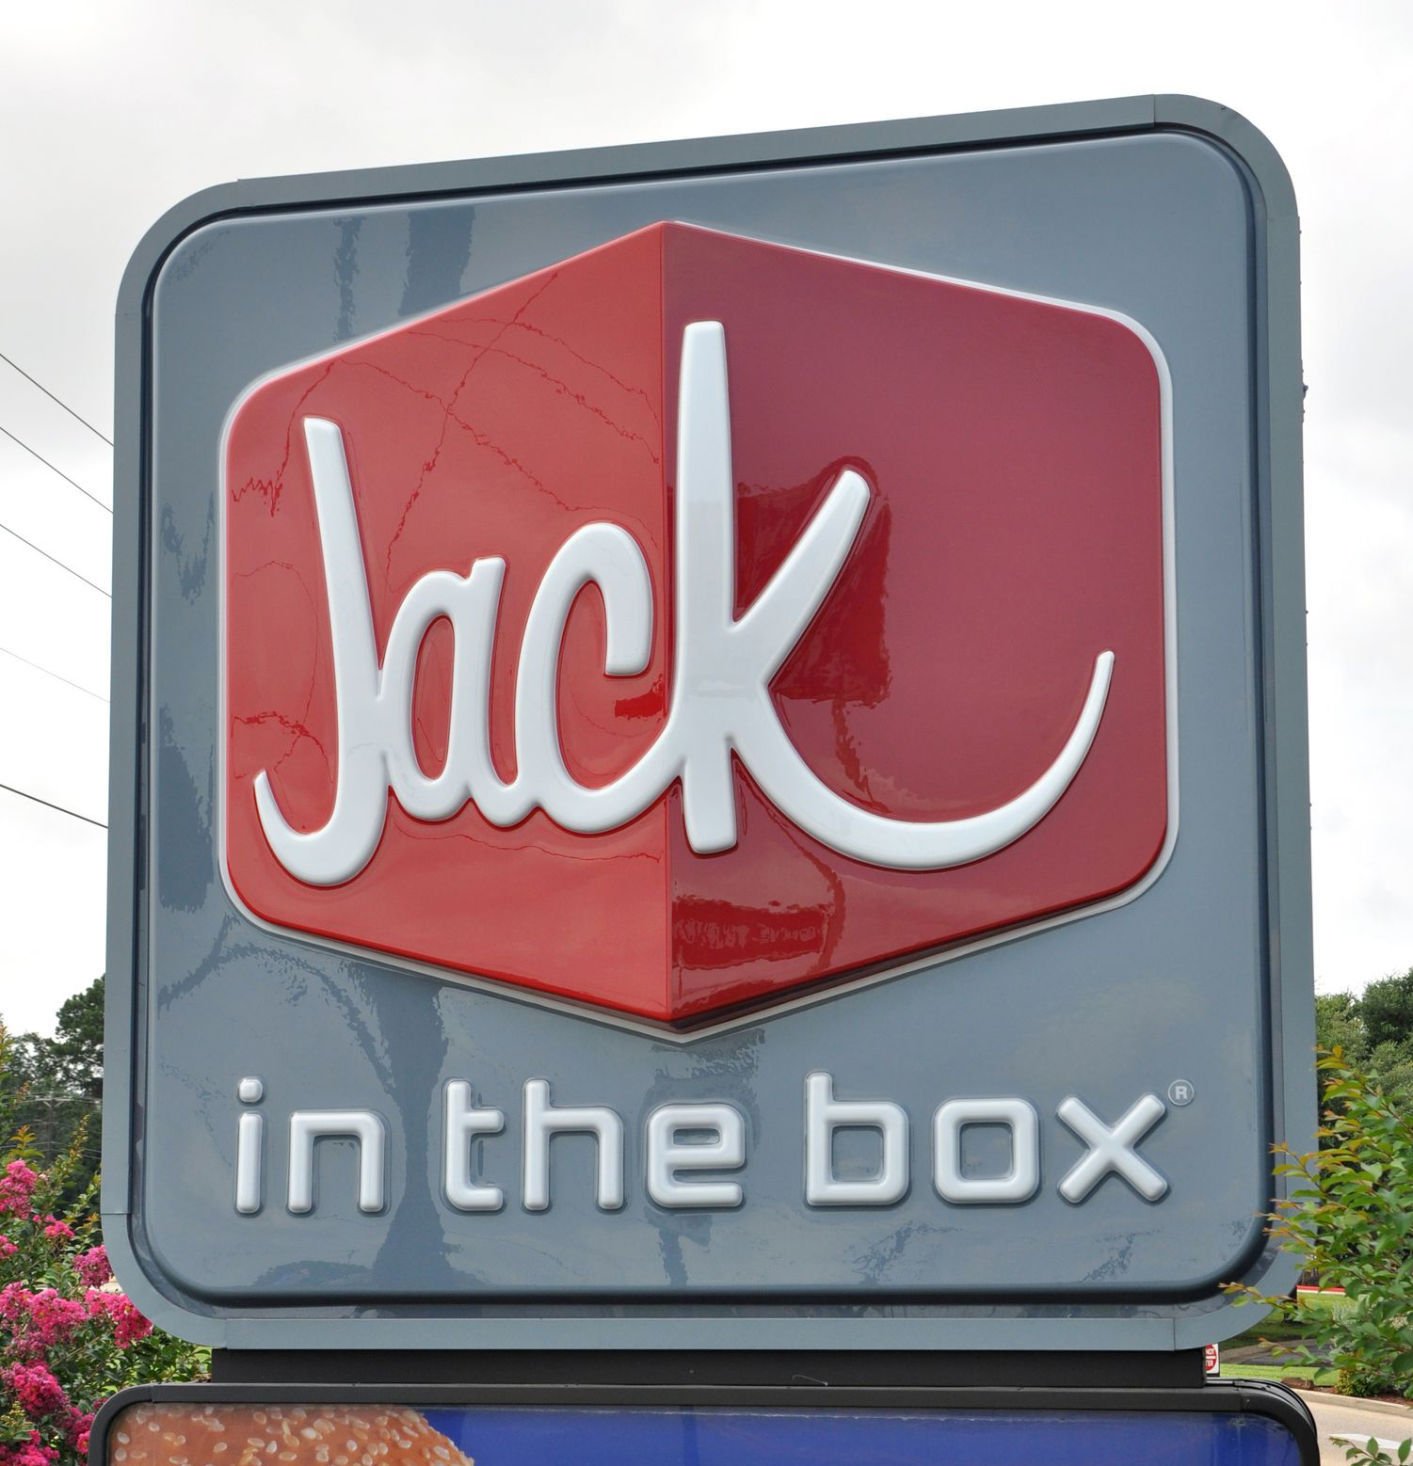 join jack box